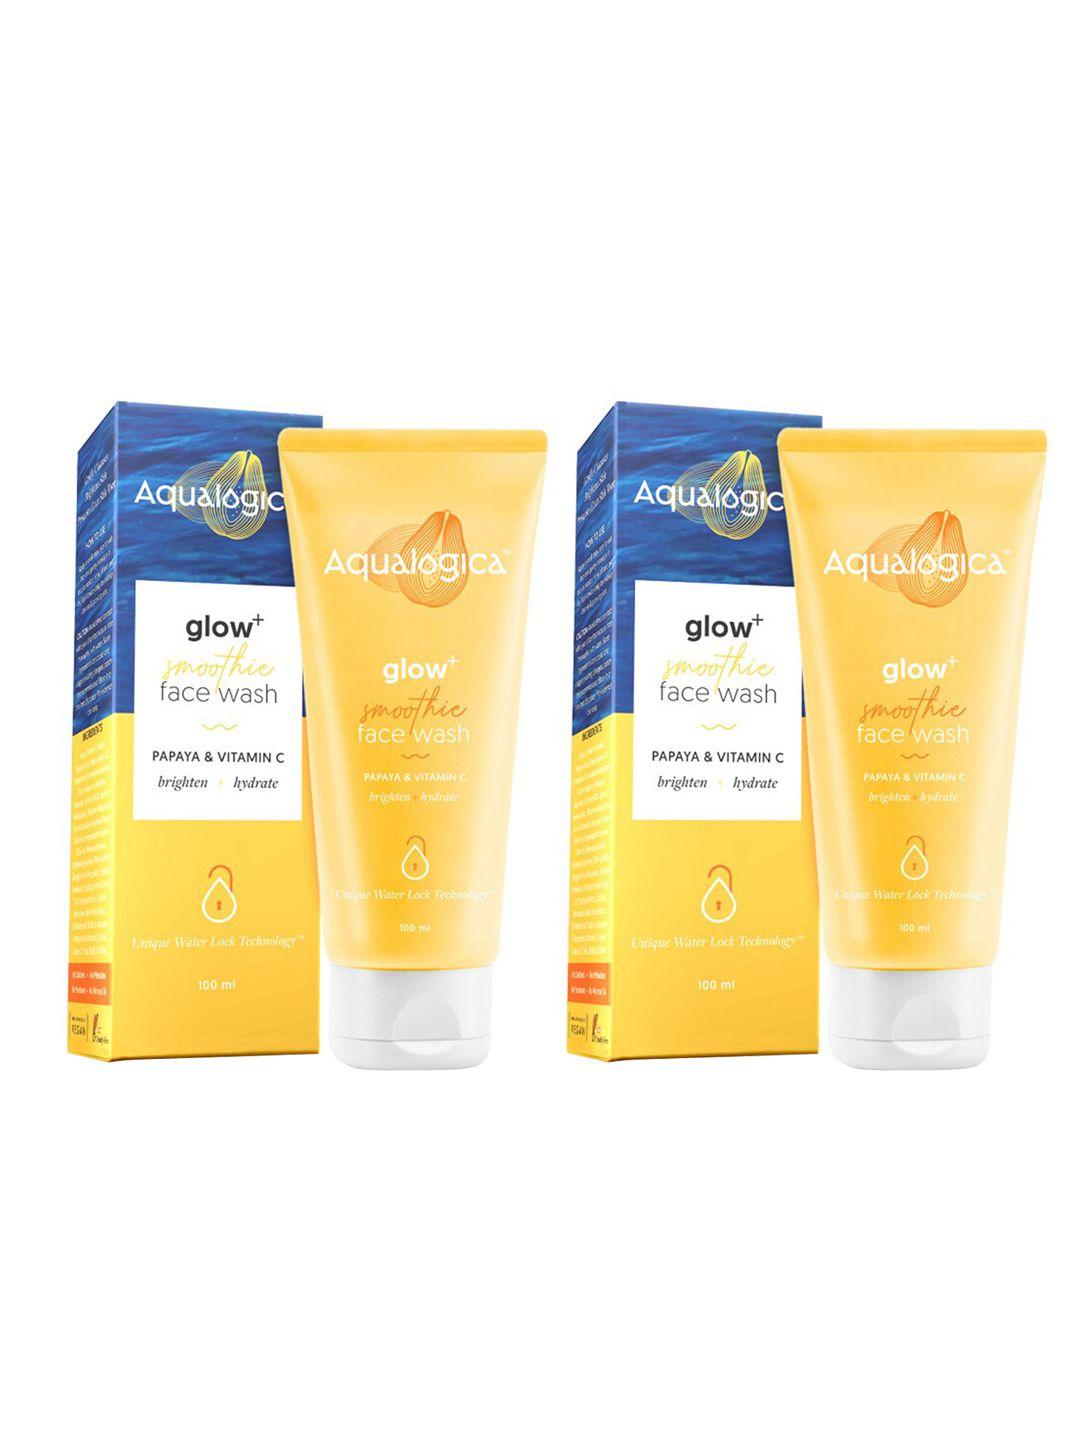 aqualogica glow+ facewash duo for deep cleansing & skin brightening with vit c face wash